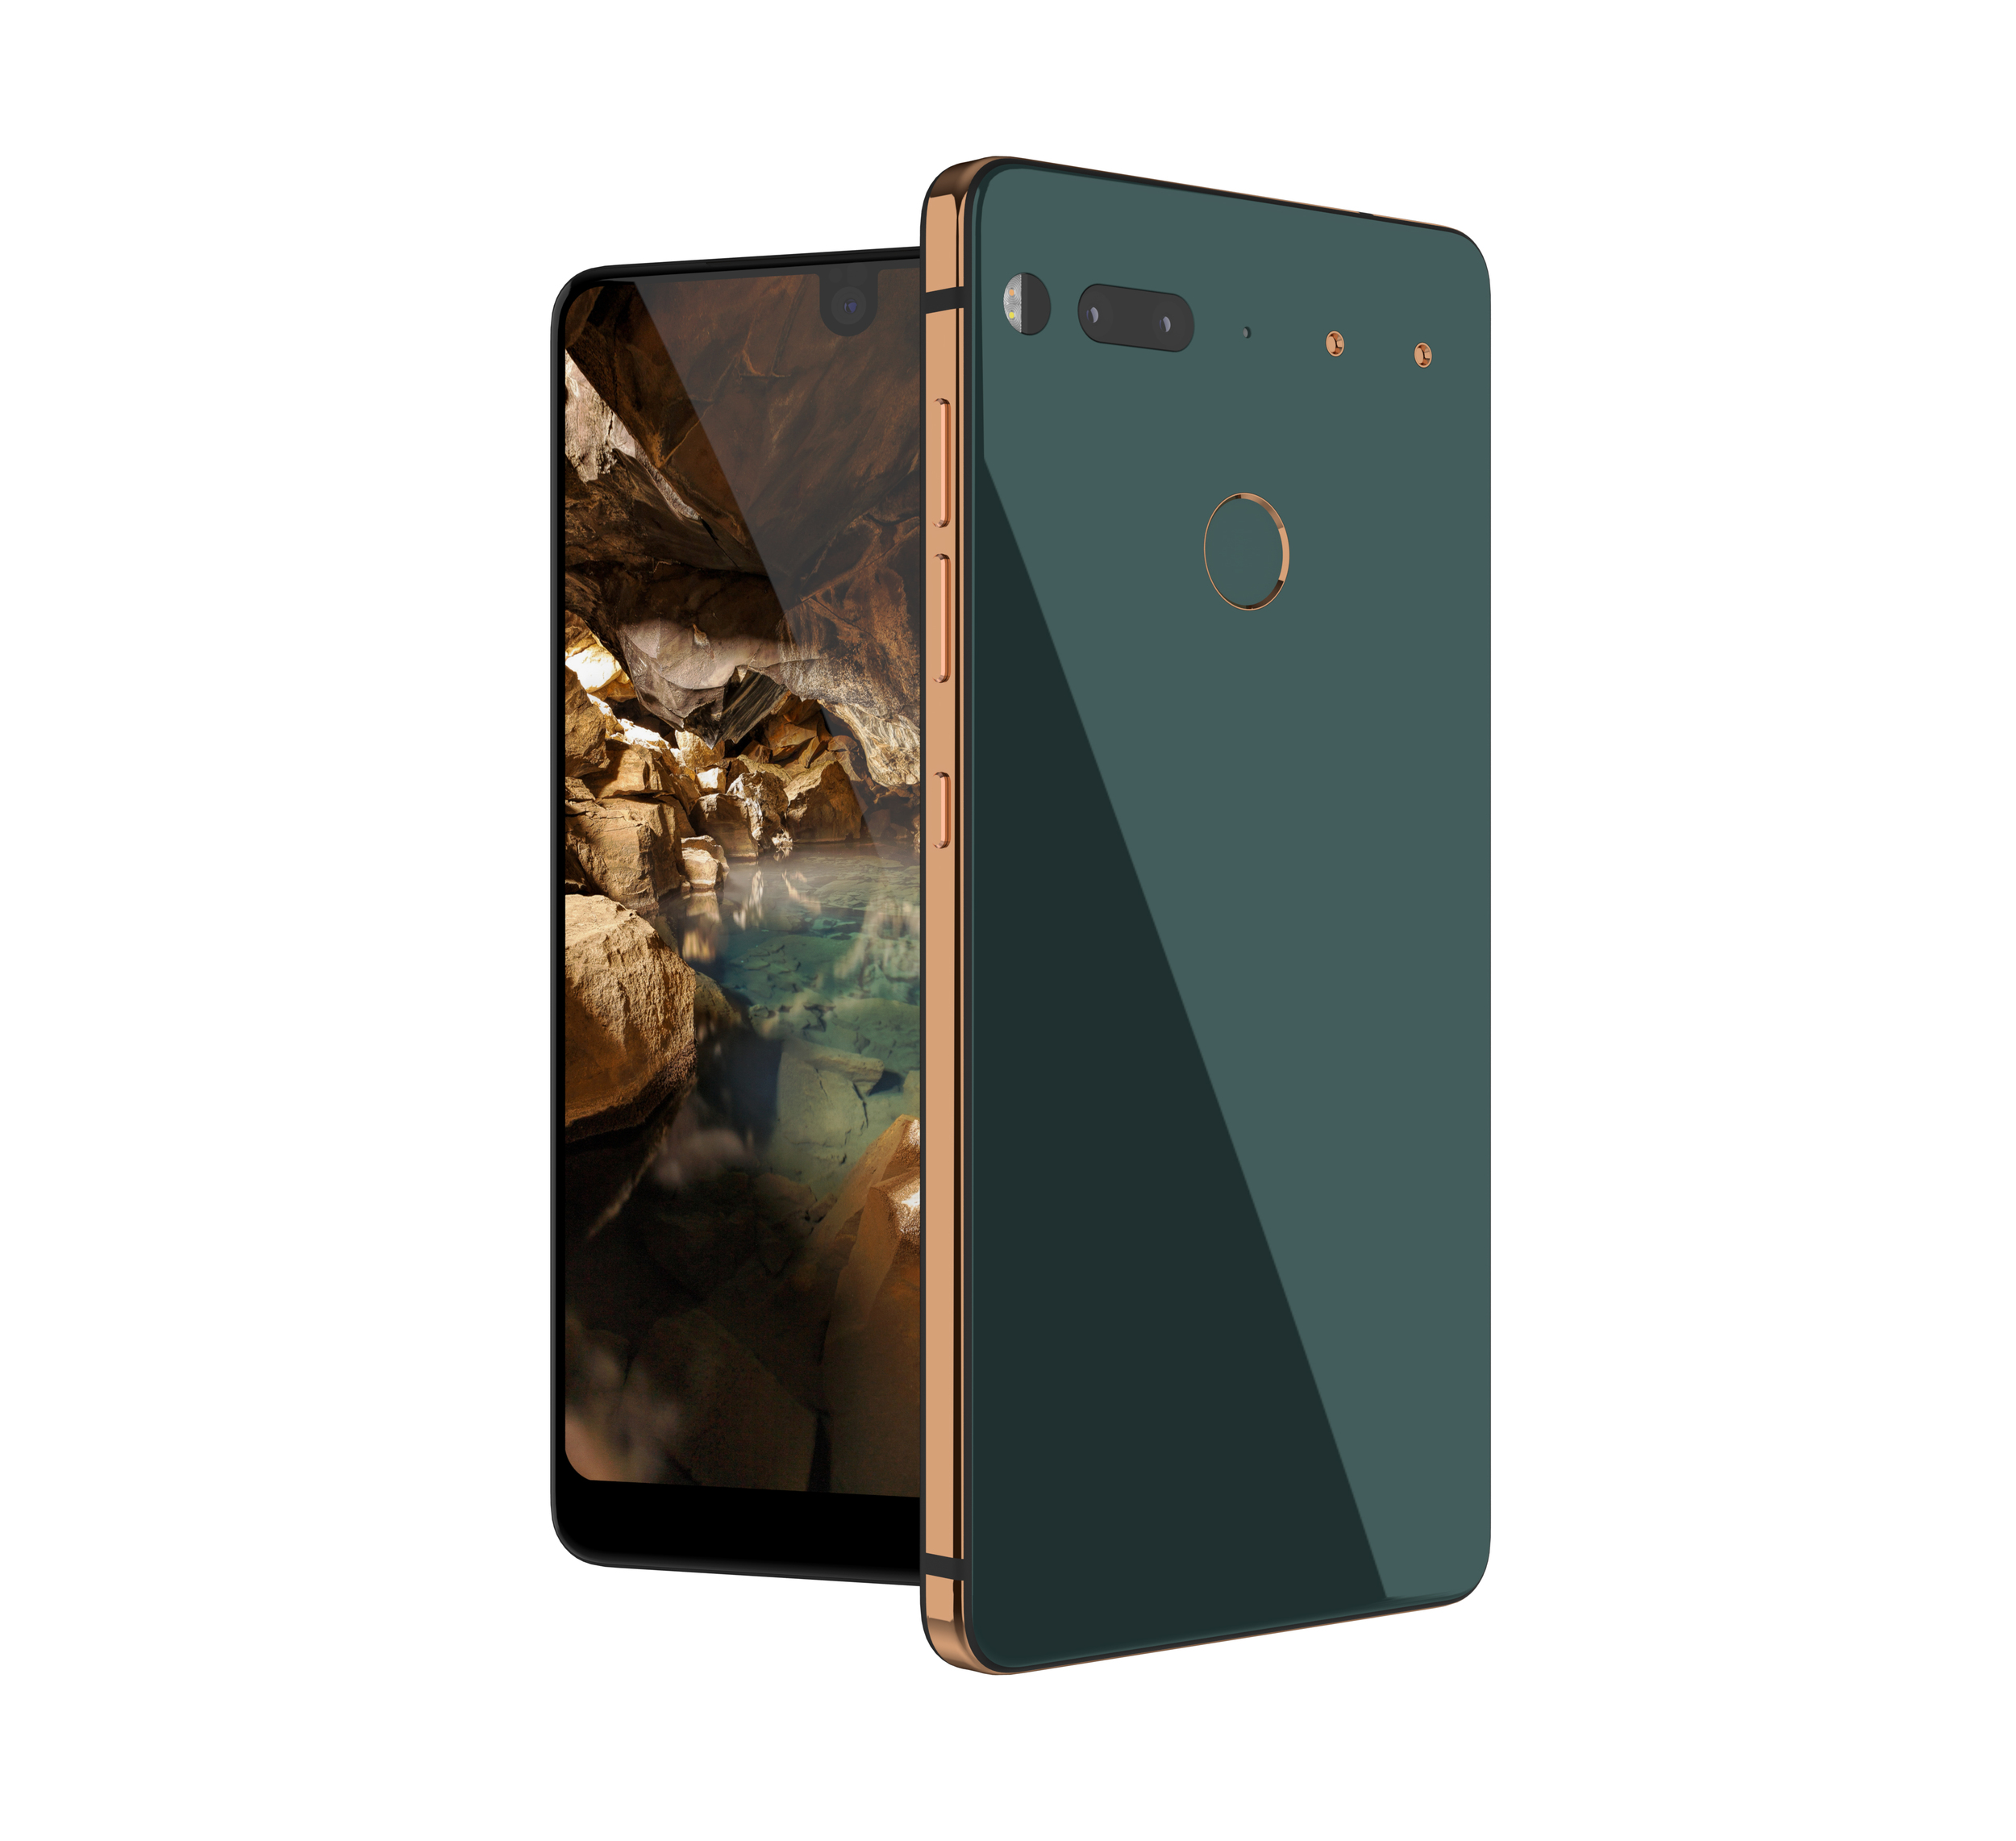 Smartphone Essential PH-1 will be available for a month and get your smart assistant